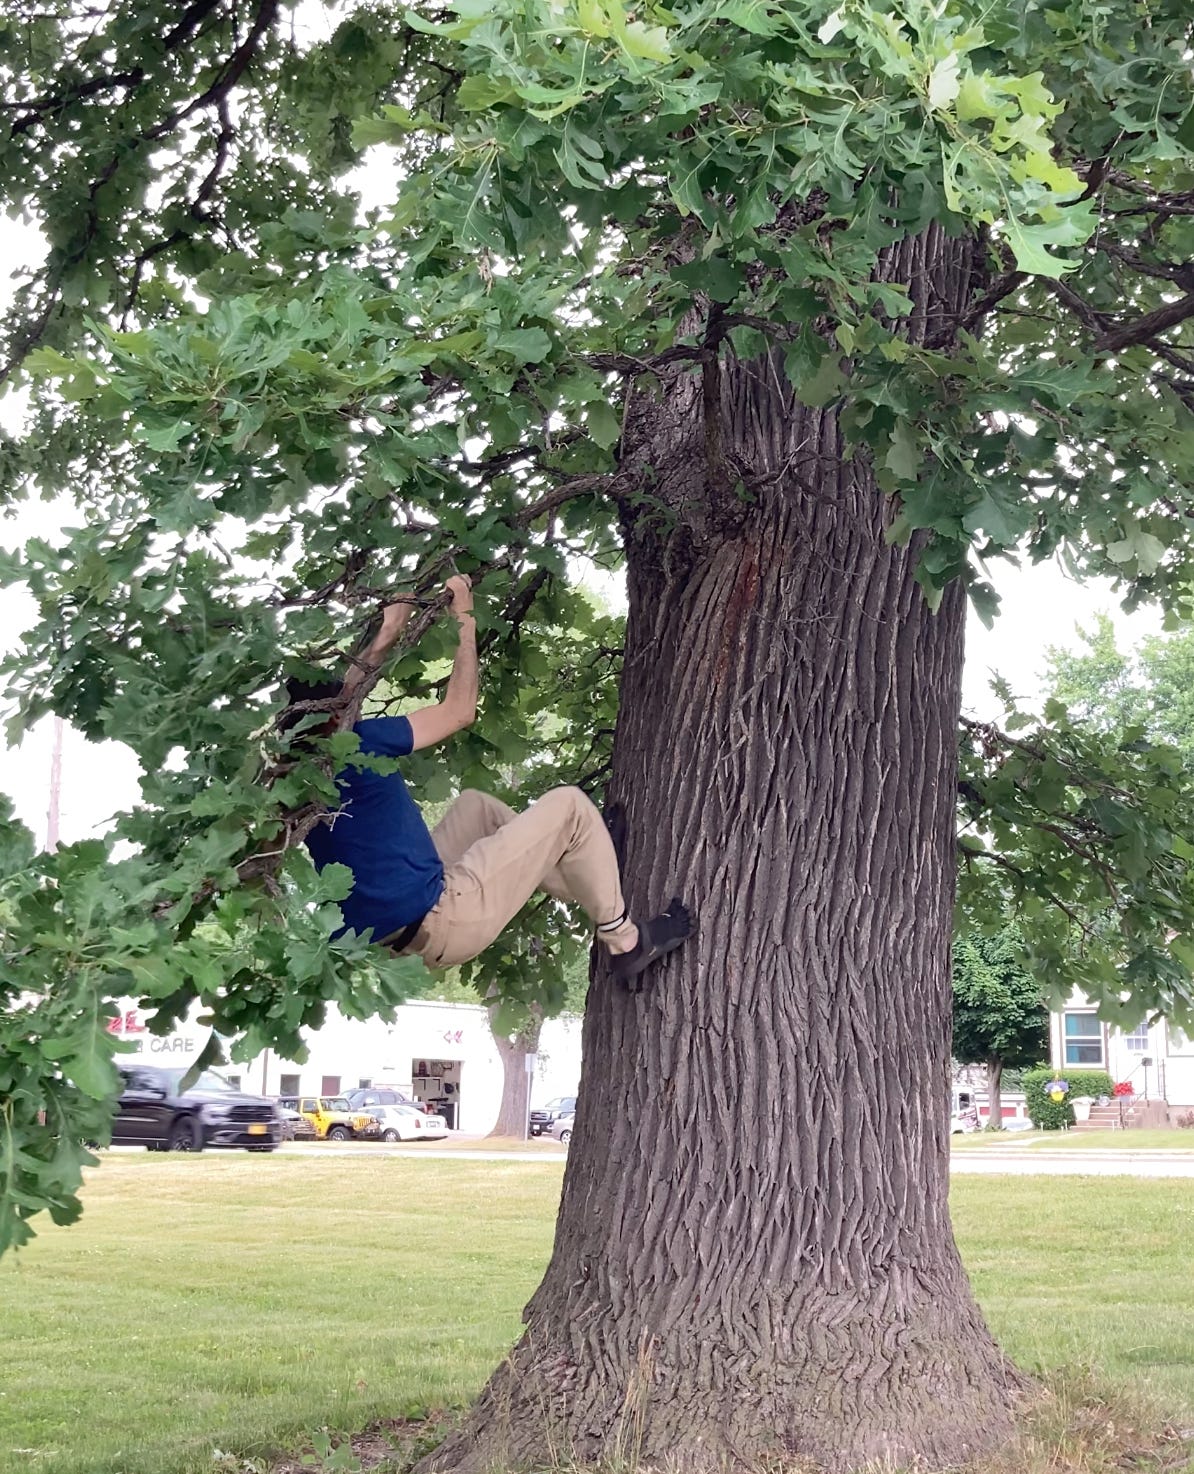 Me, grabbing a low branch and working my way up the tree.